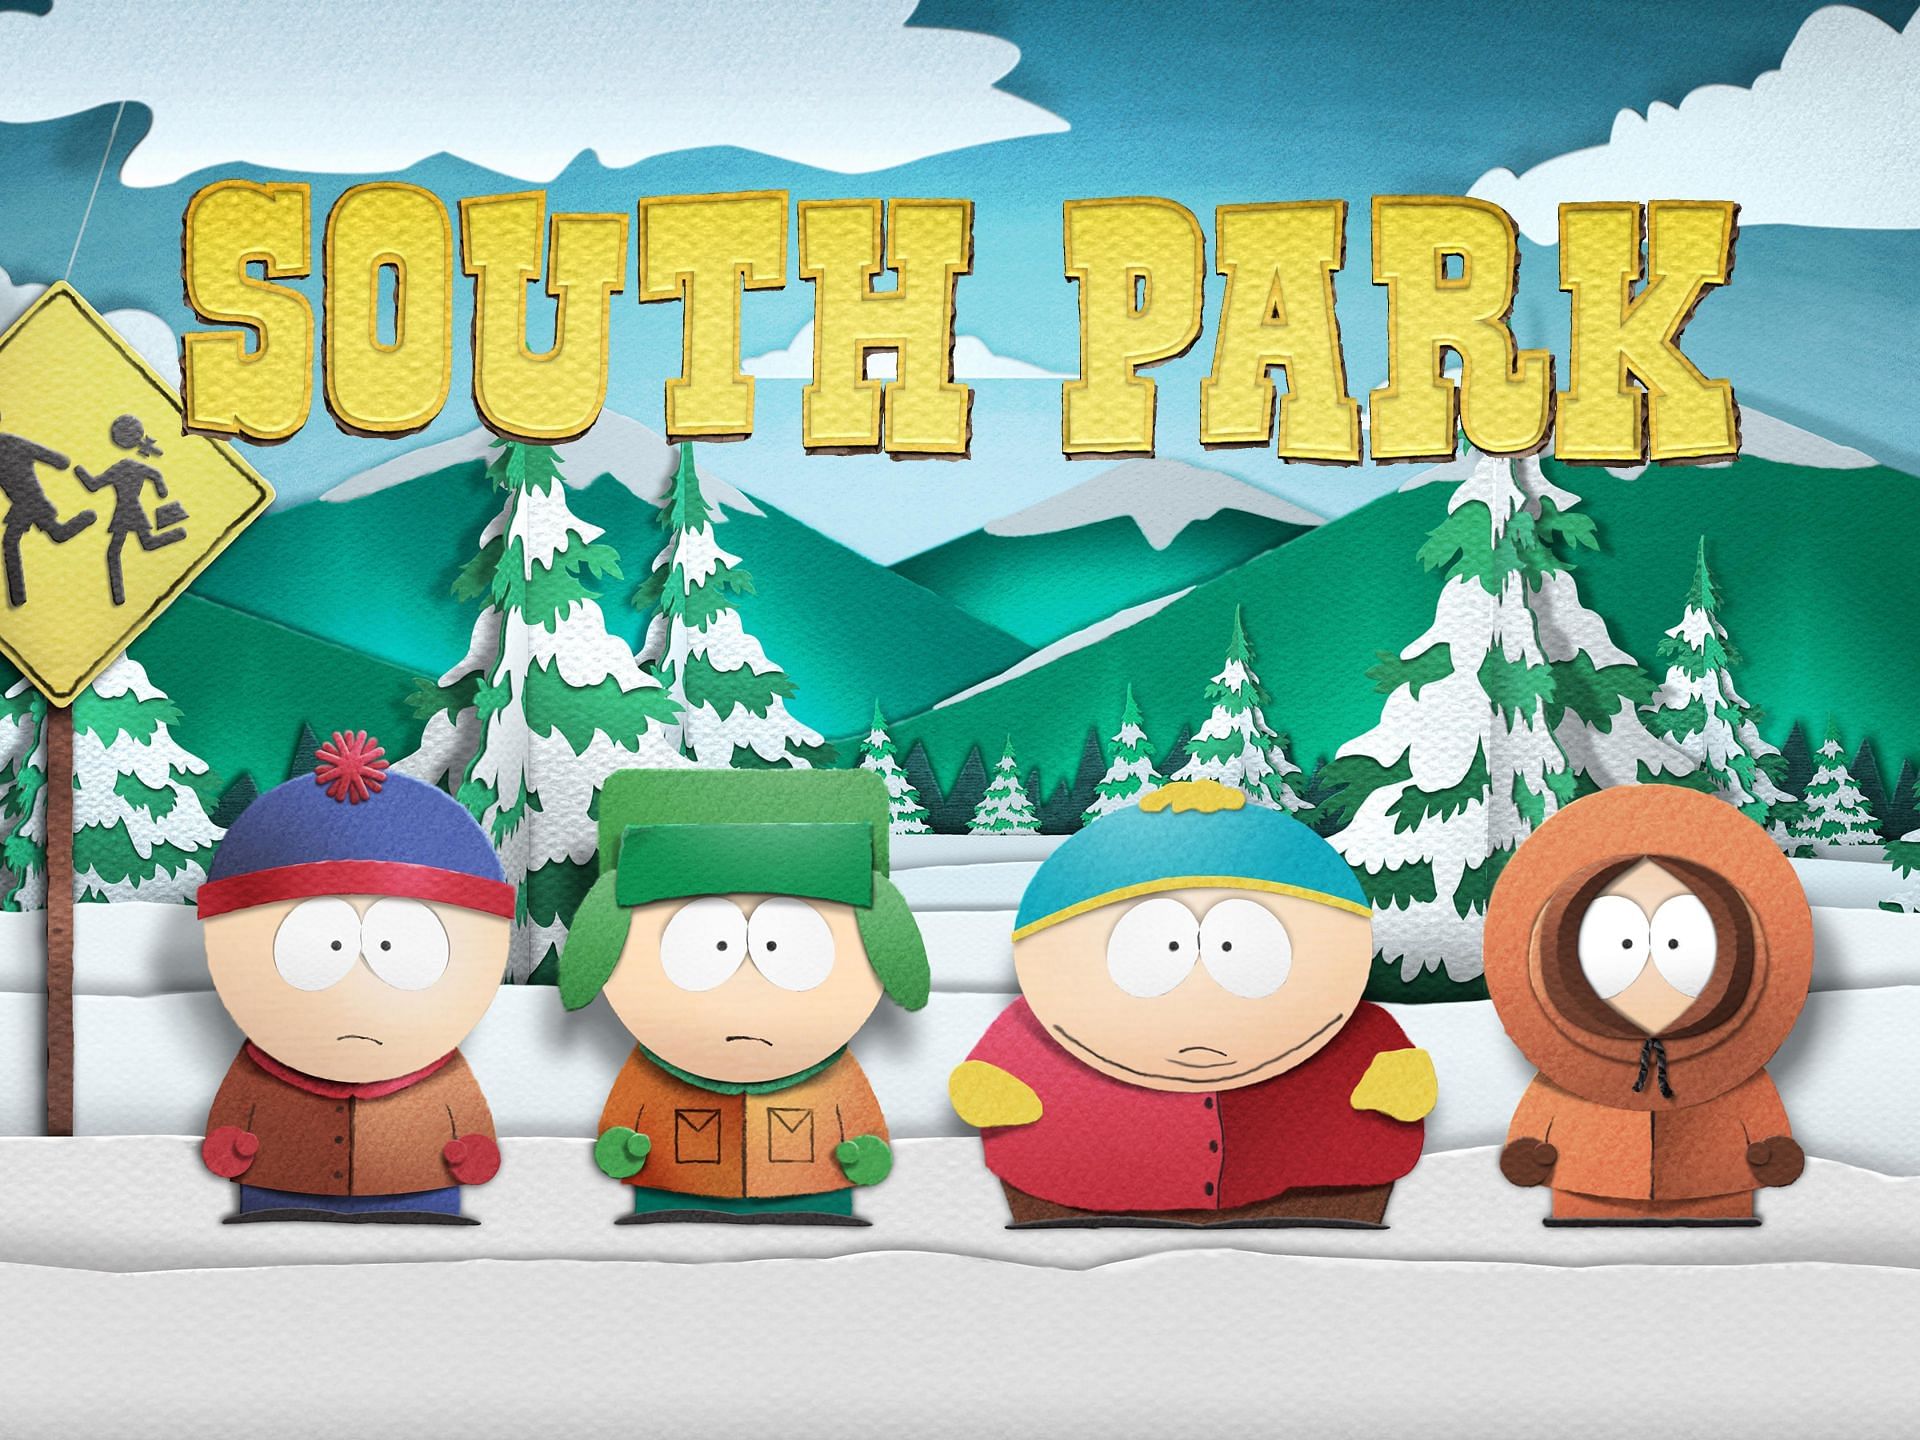 All South Park Christmas episodes in order (Image via IMDb)